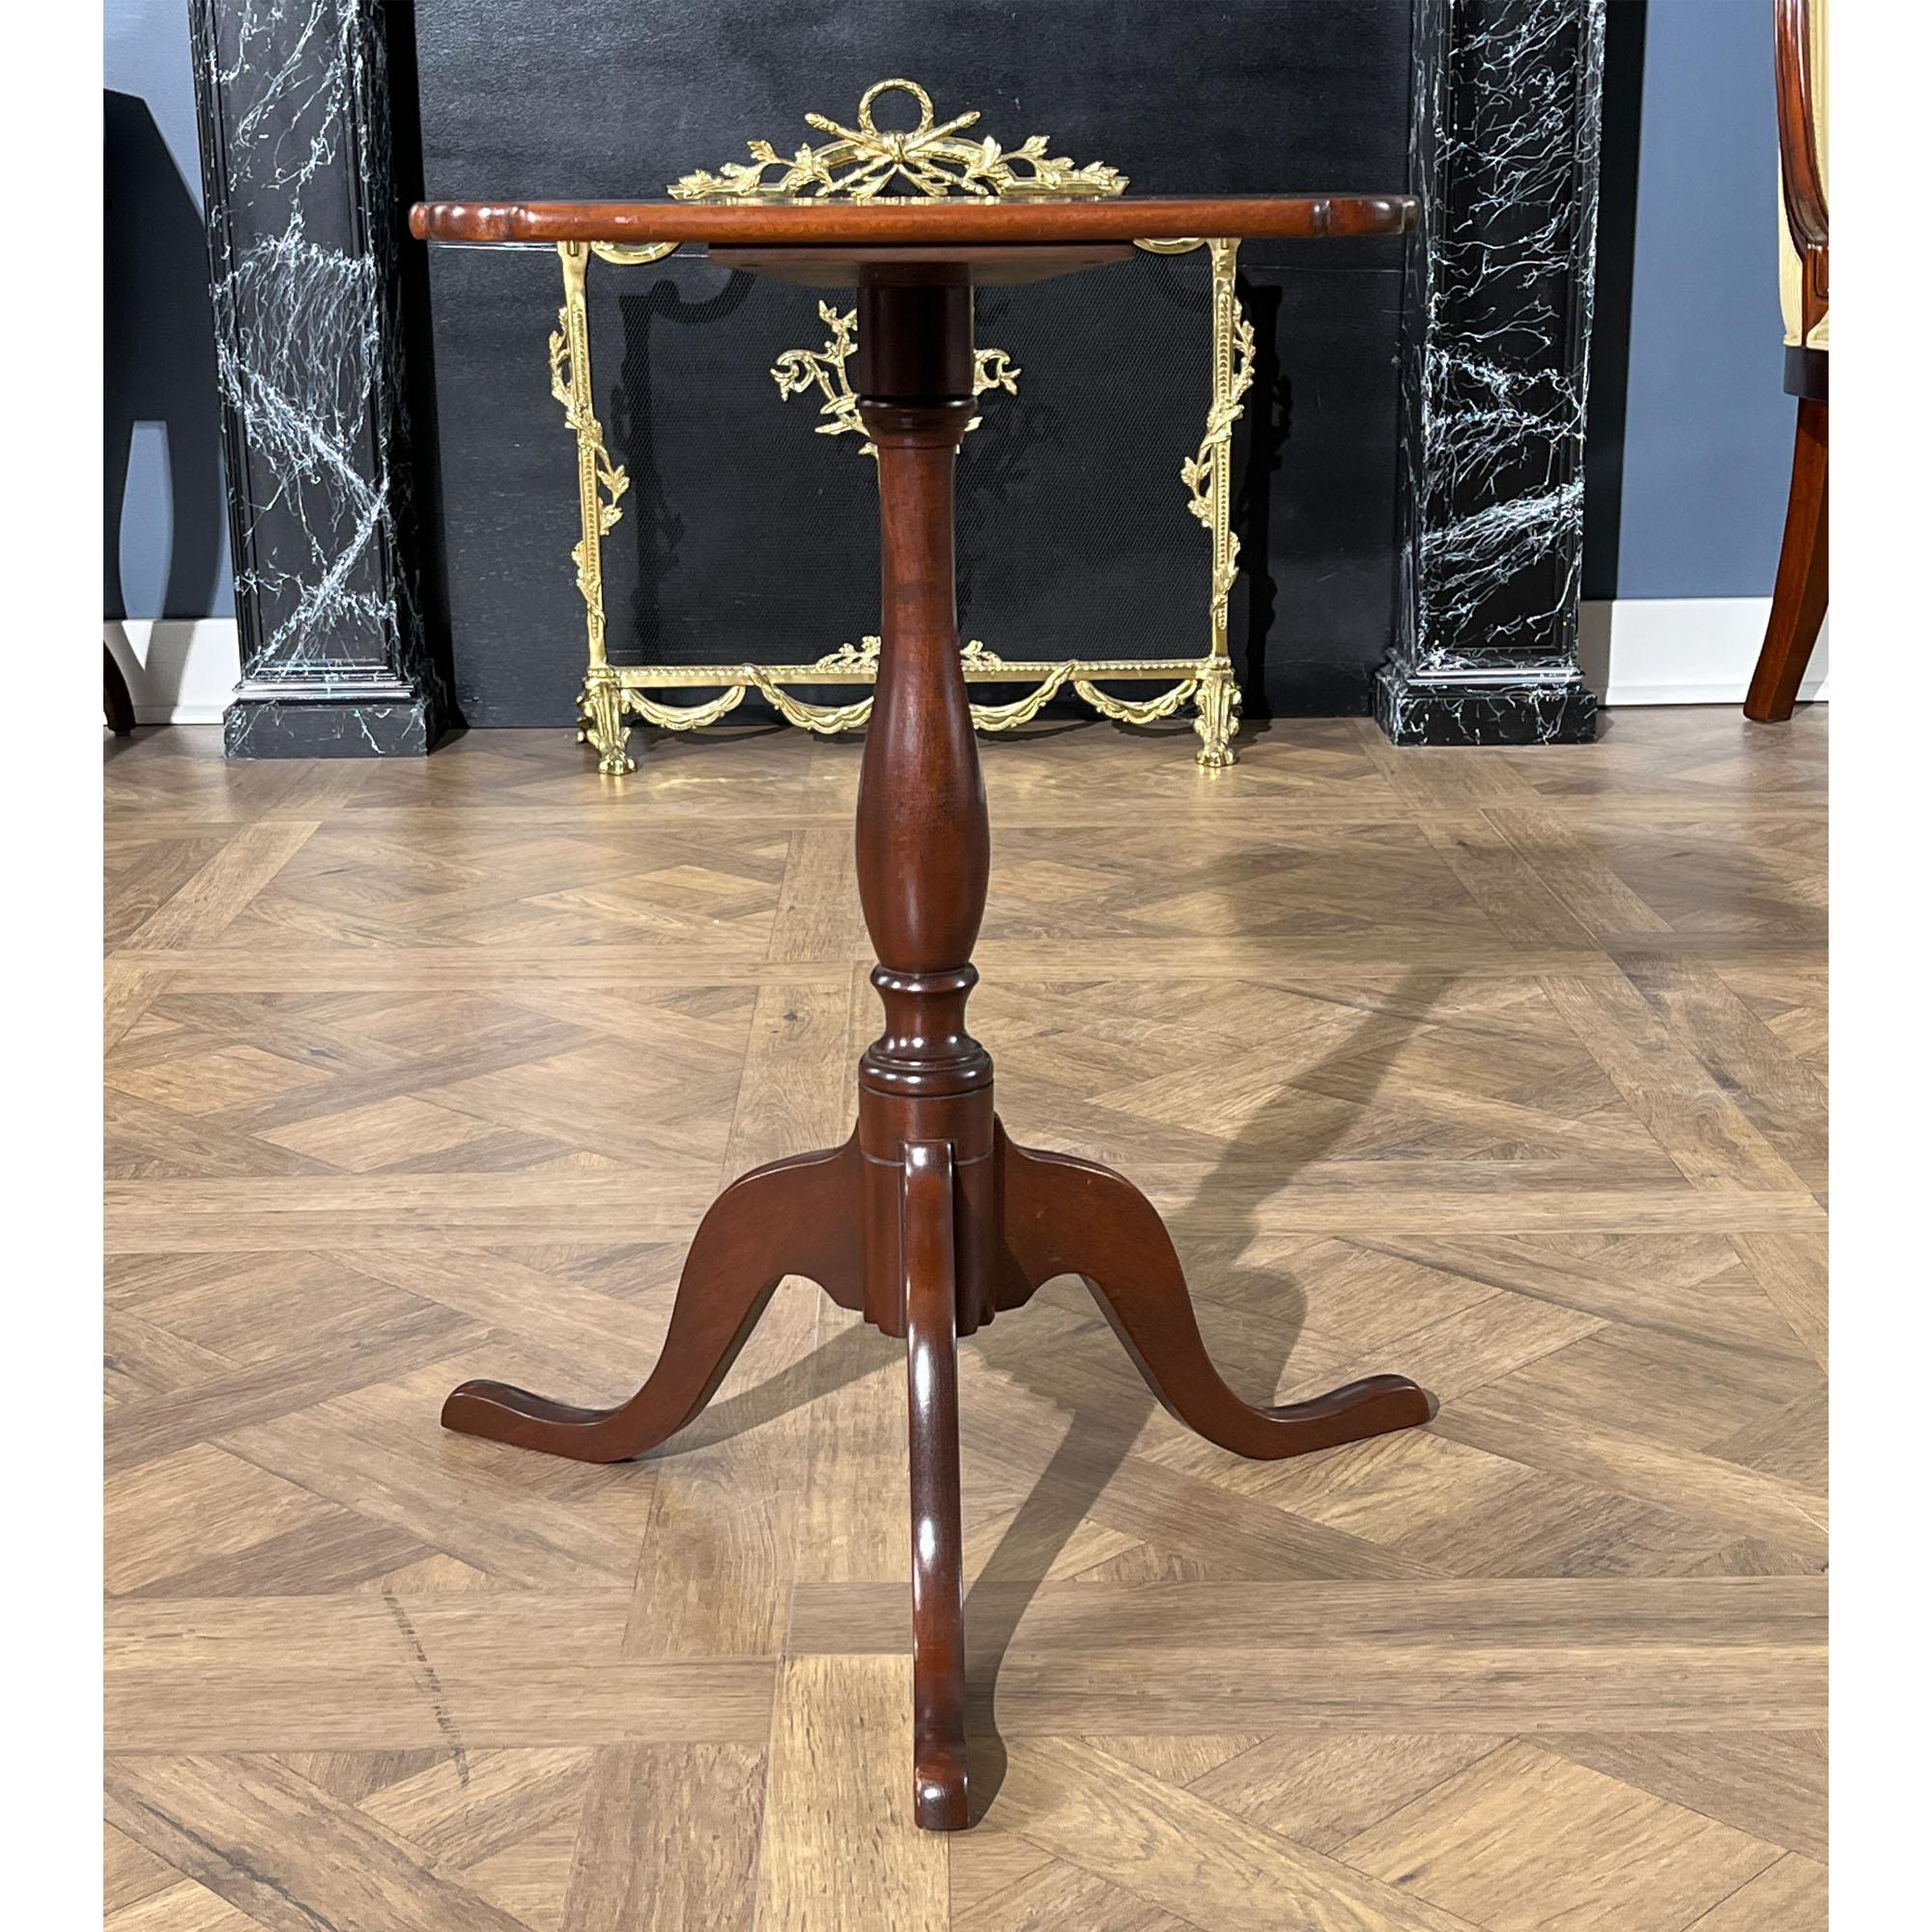 From Niagara Furniture a Vintage Small Mahogany Table. While petite and elegant this faithful antique reproduction produced by the Henry Ford Museum in Dearborn Michigan is also sturdy and strong. Great quality construction is the hall mark of the